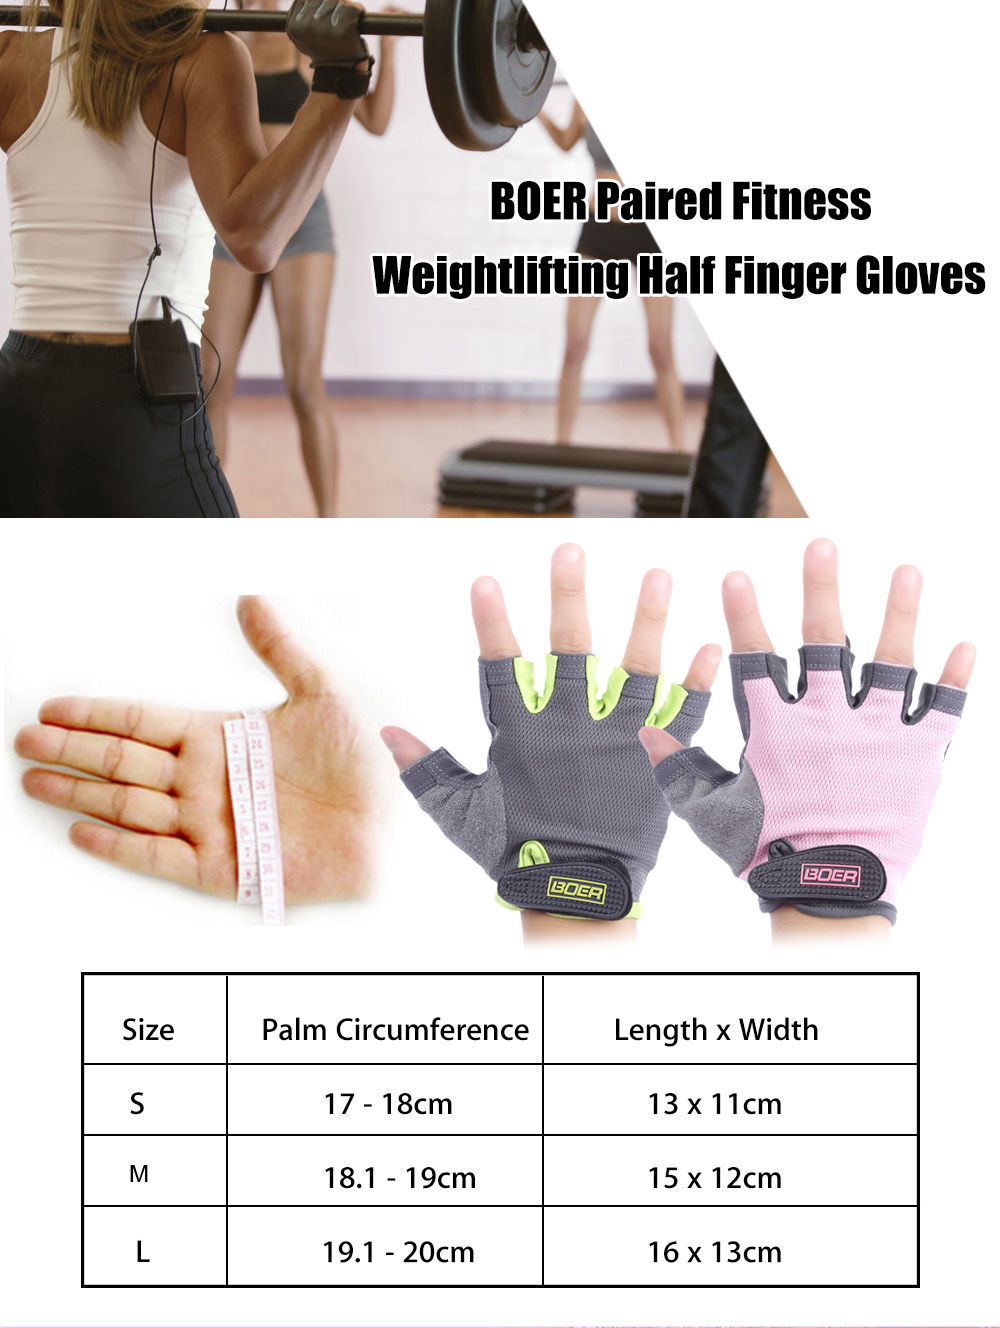 BOER Paired Body Building Fitness Weightlifting Half Finger Gloves for Women